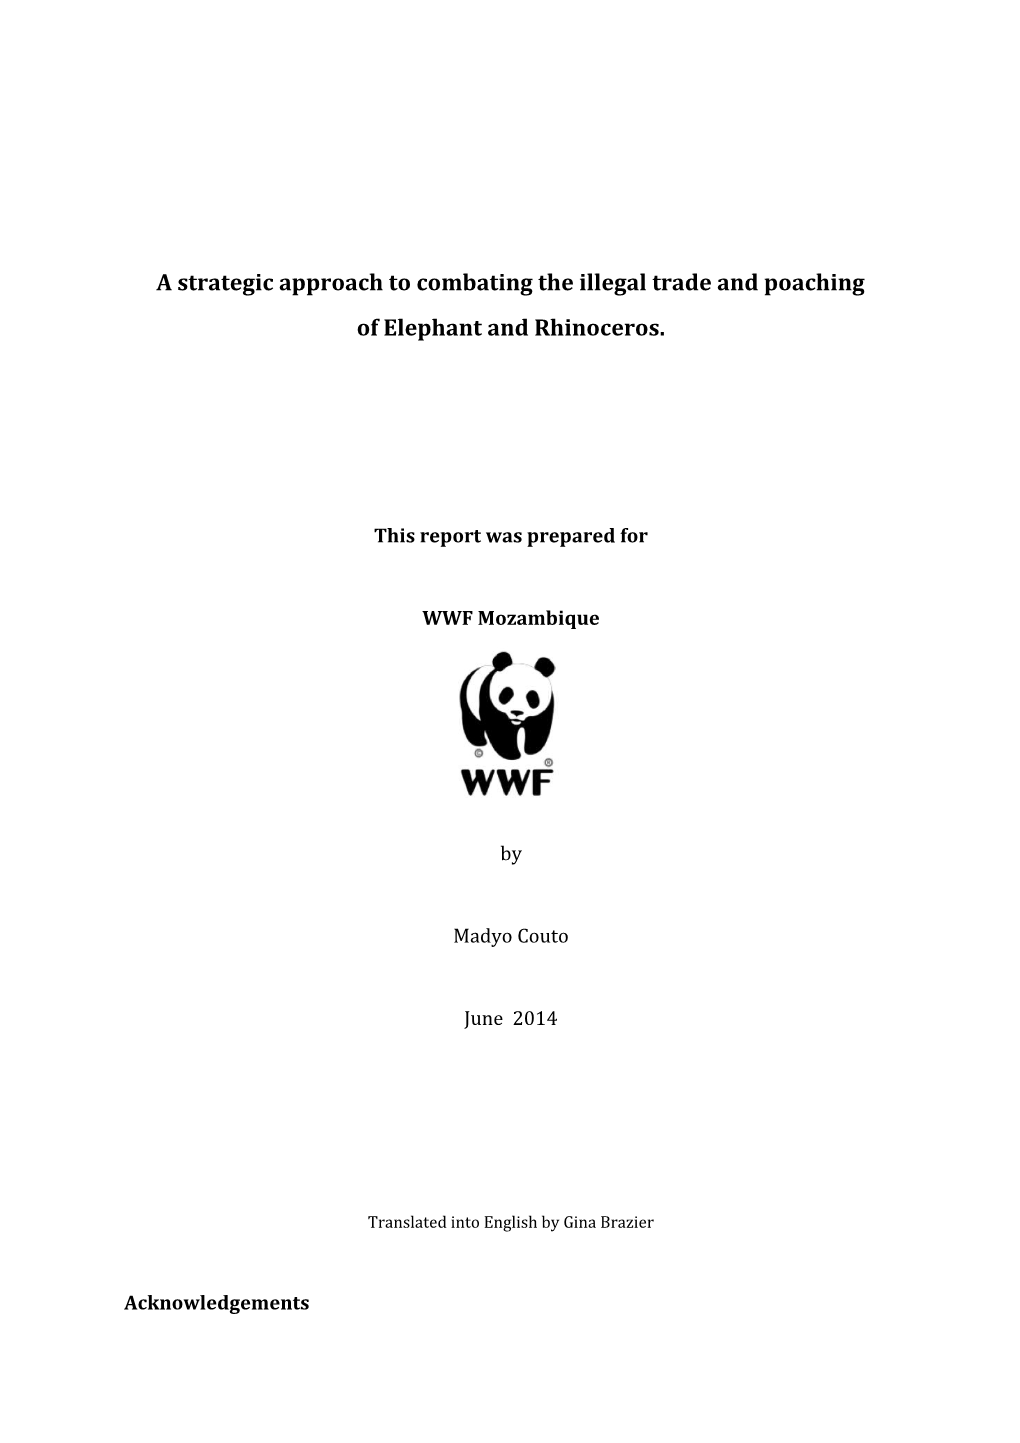 A Strategic Approach to Combating the Illegal Trade and Poaching